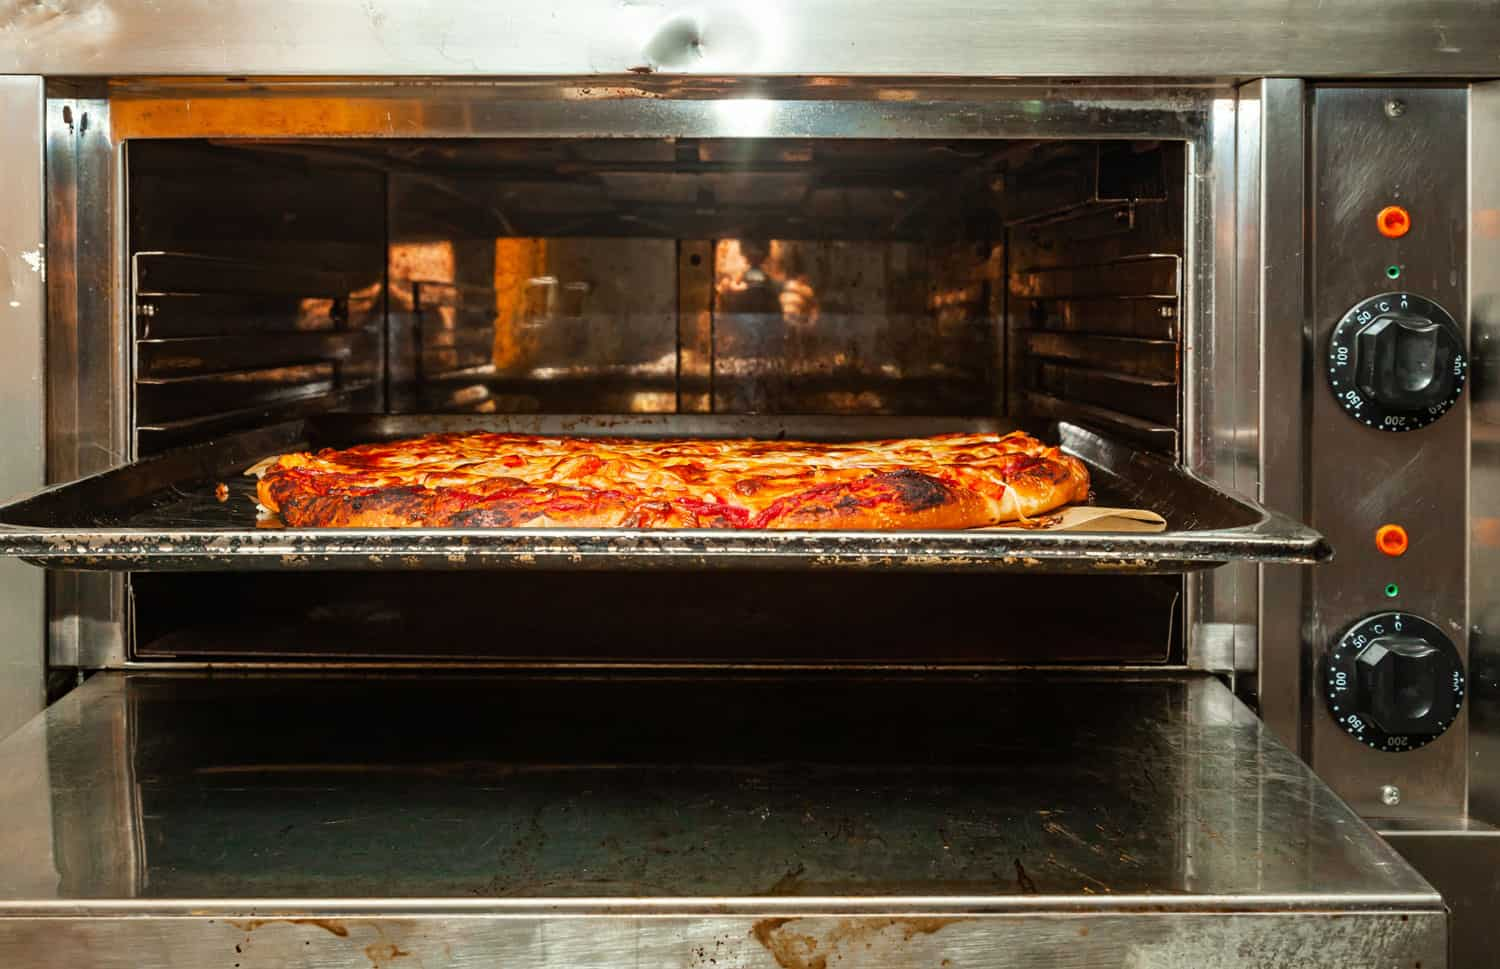 Keeping pizza warm in an oven